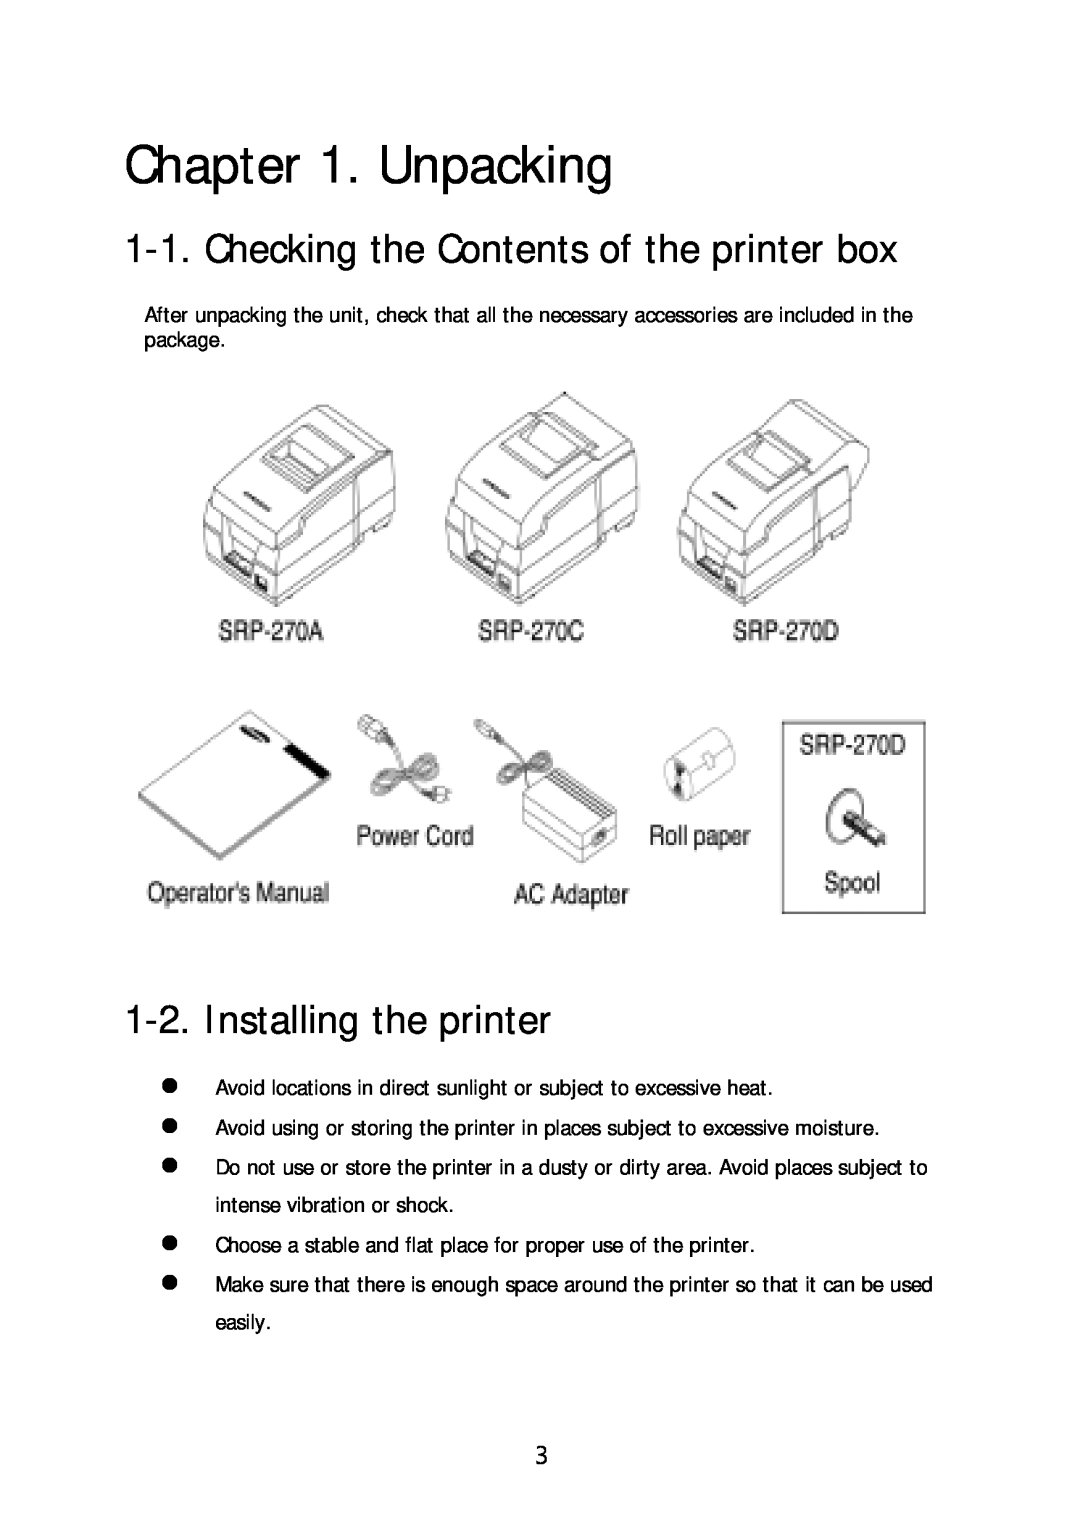 Sanyo SRP-270 specifications Unpacking, Checking the Contents of the printer box, Installing the printer 